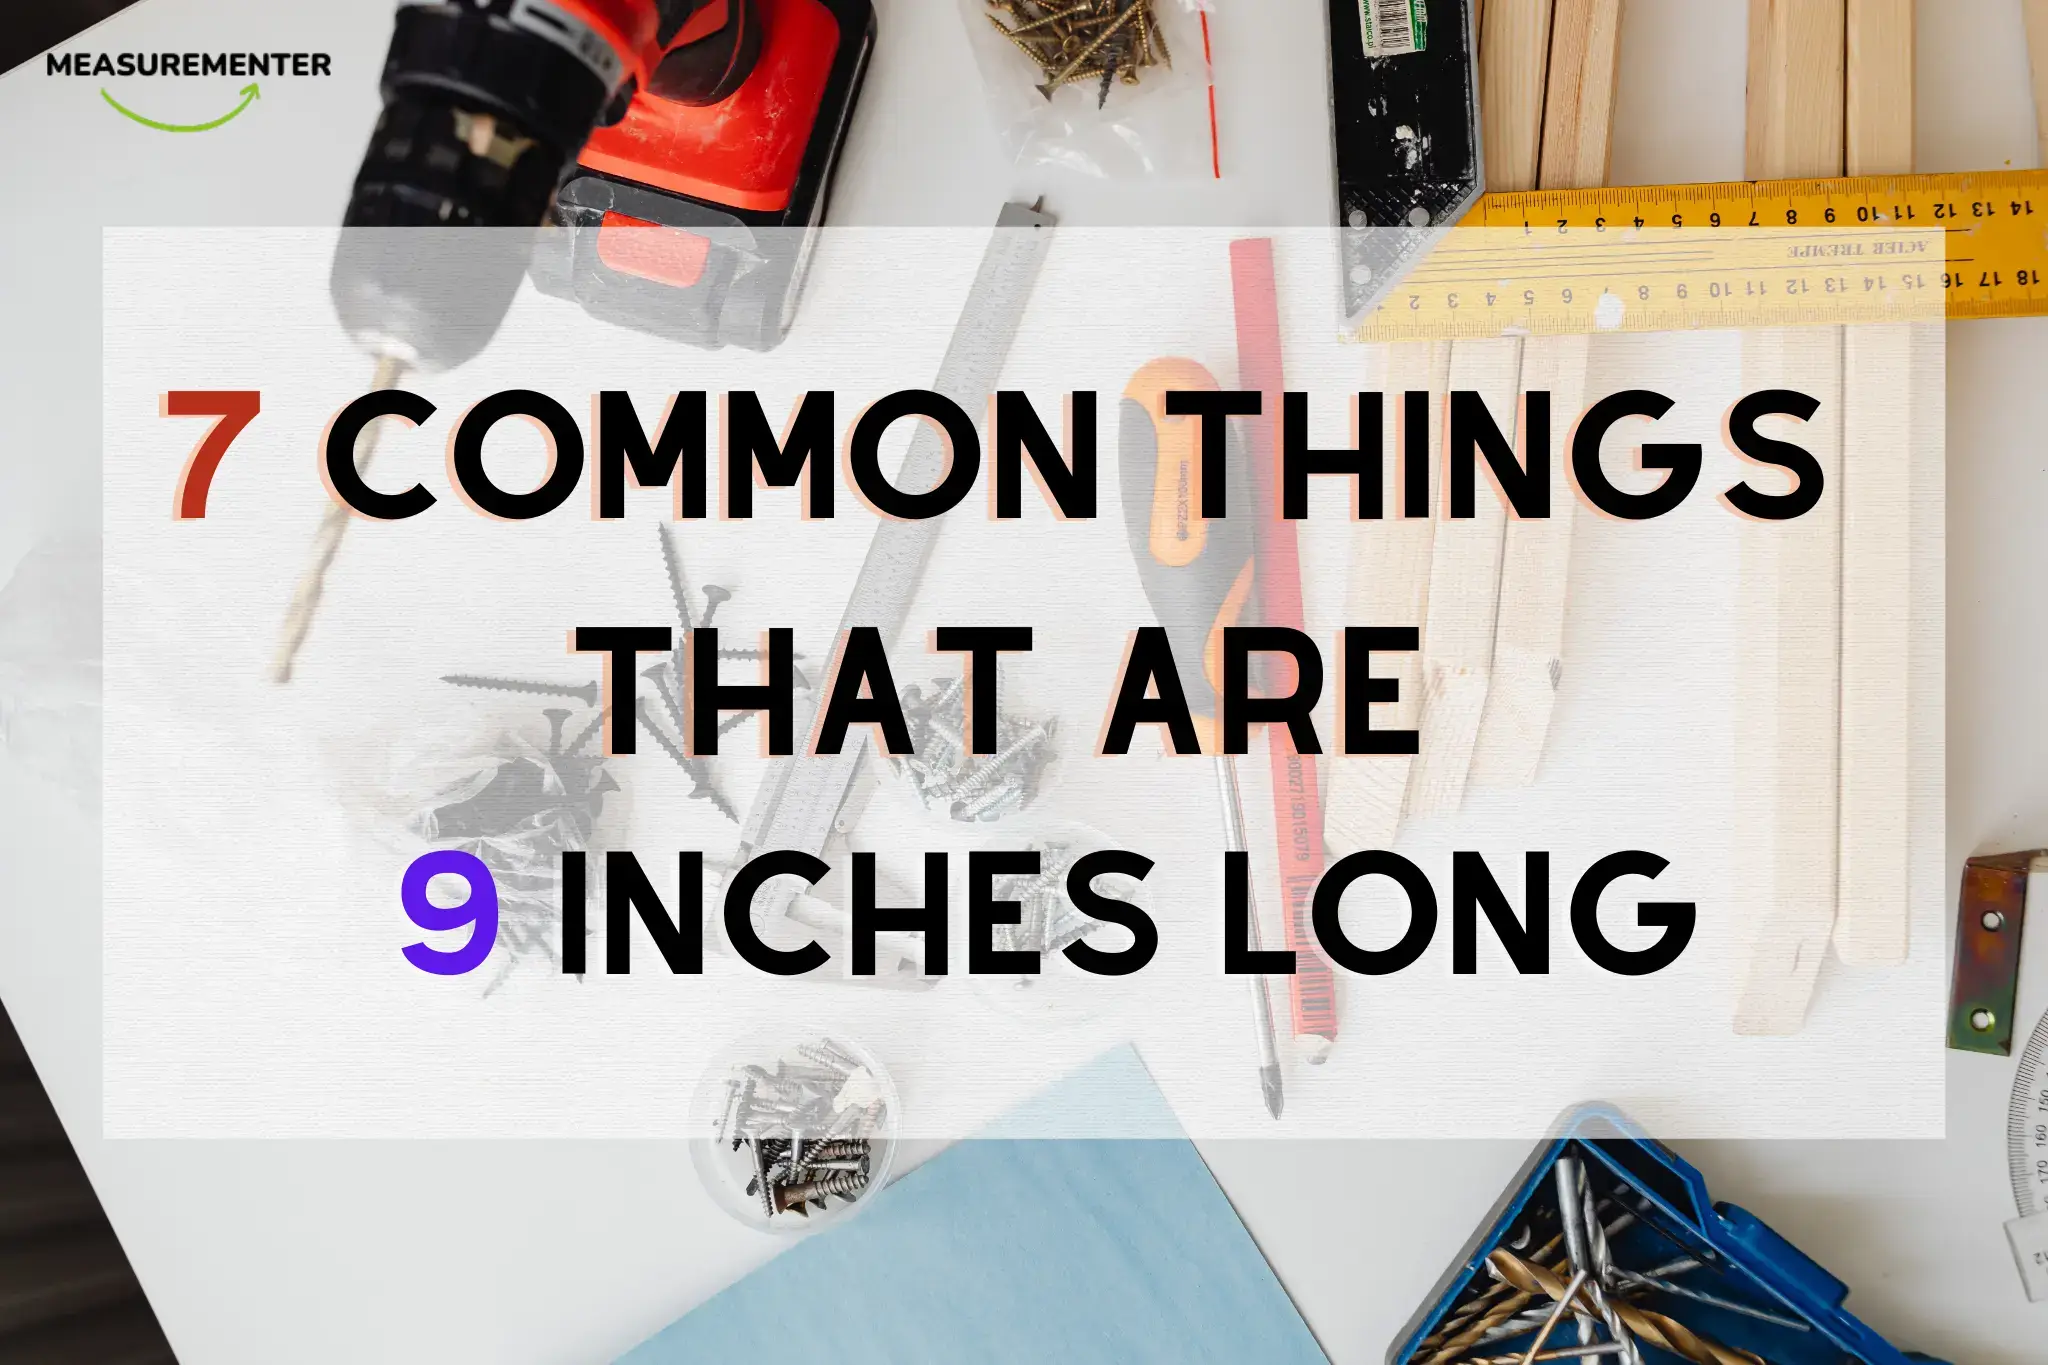 7 Common things that are 9 inches long, things that are 9 inches long